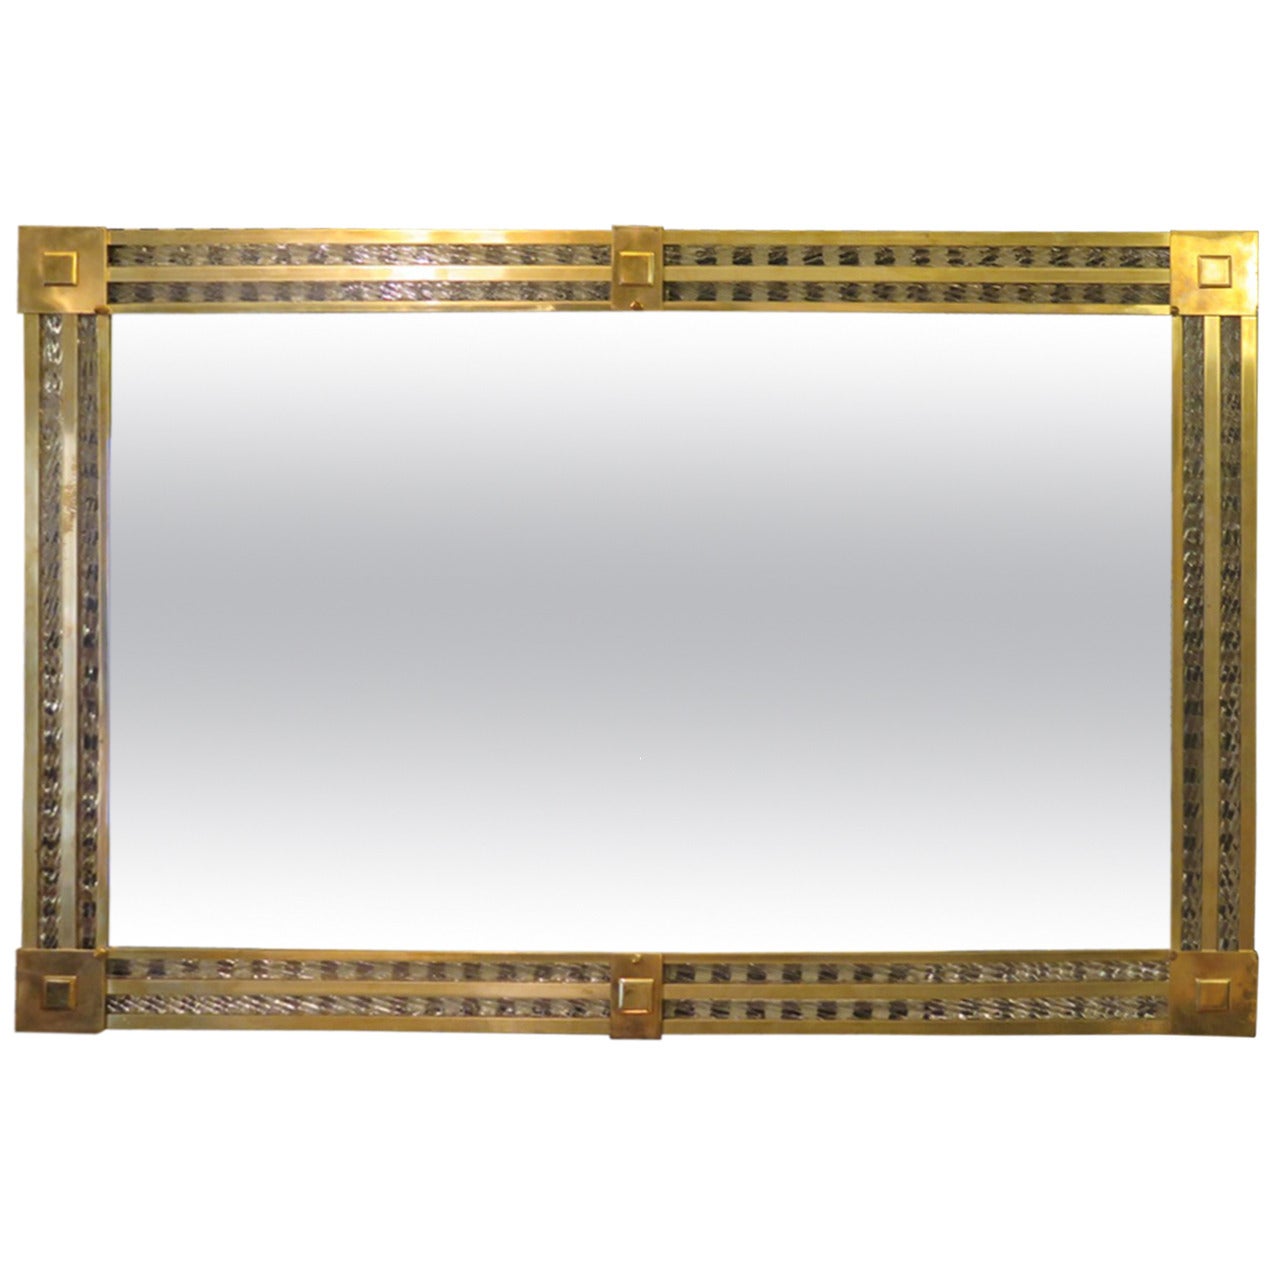 Glass and Brass Mirror by Barovier e Toso